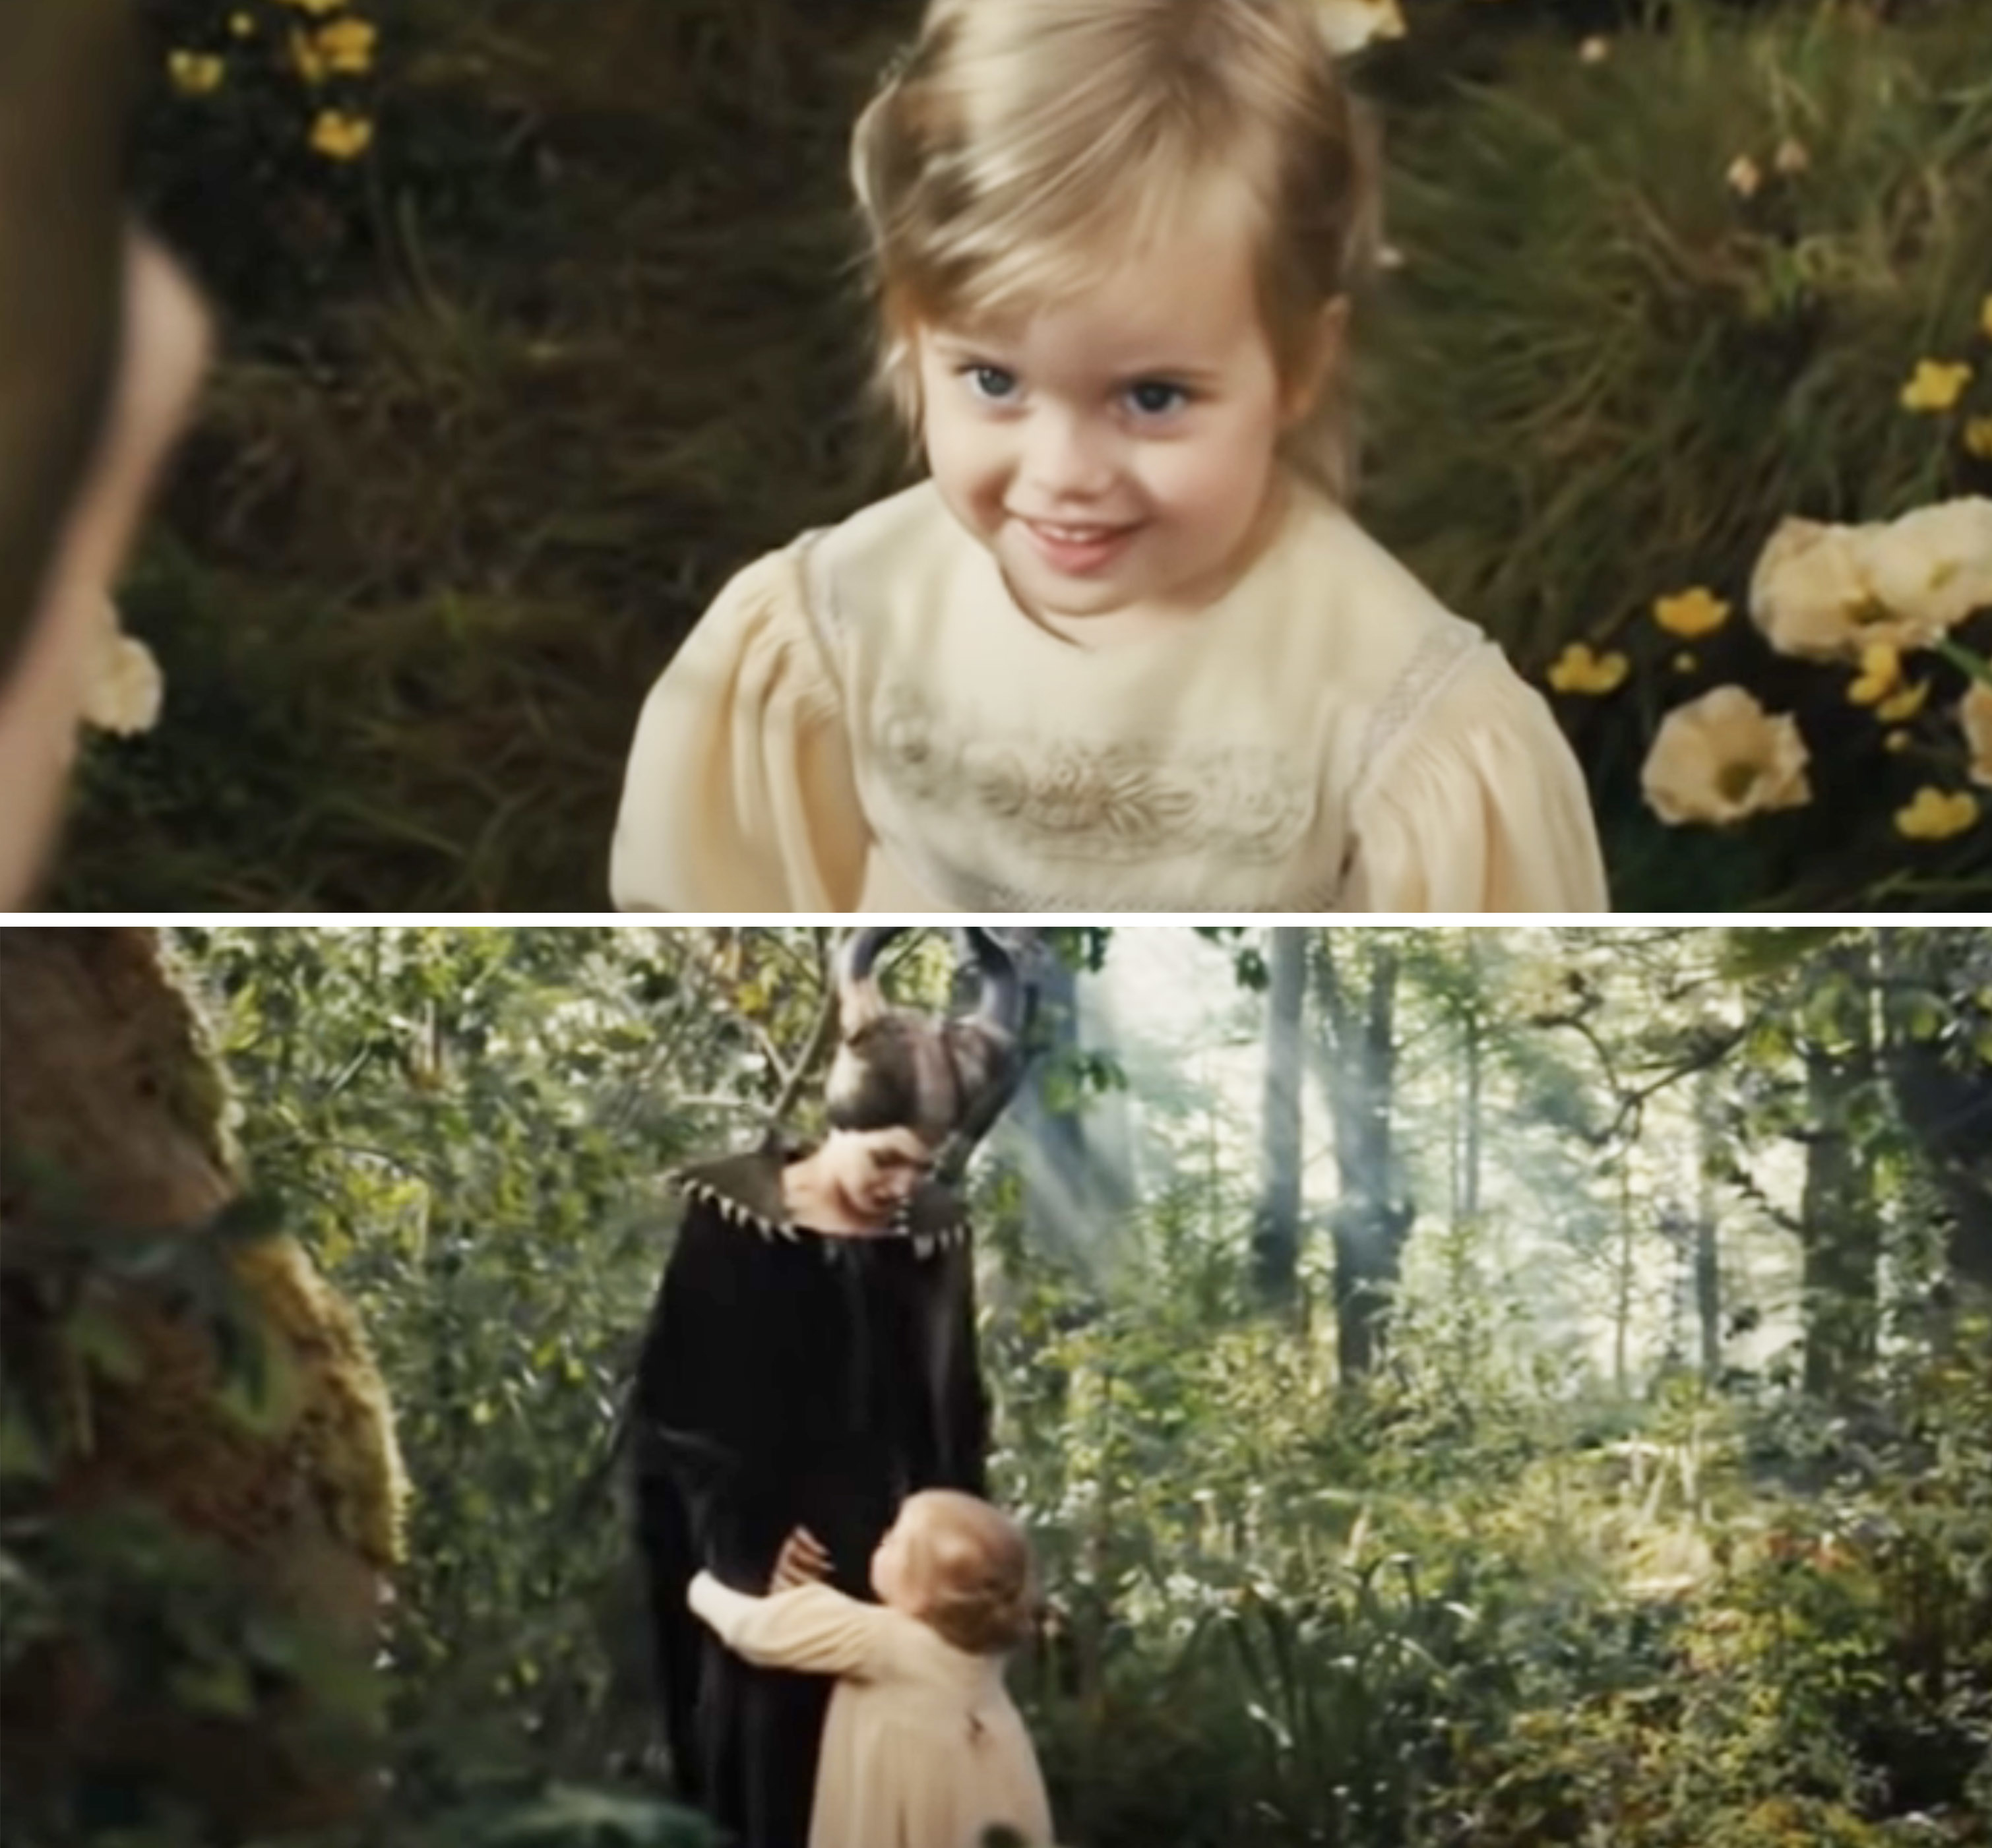 the toddler going up to maleficent in the woods